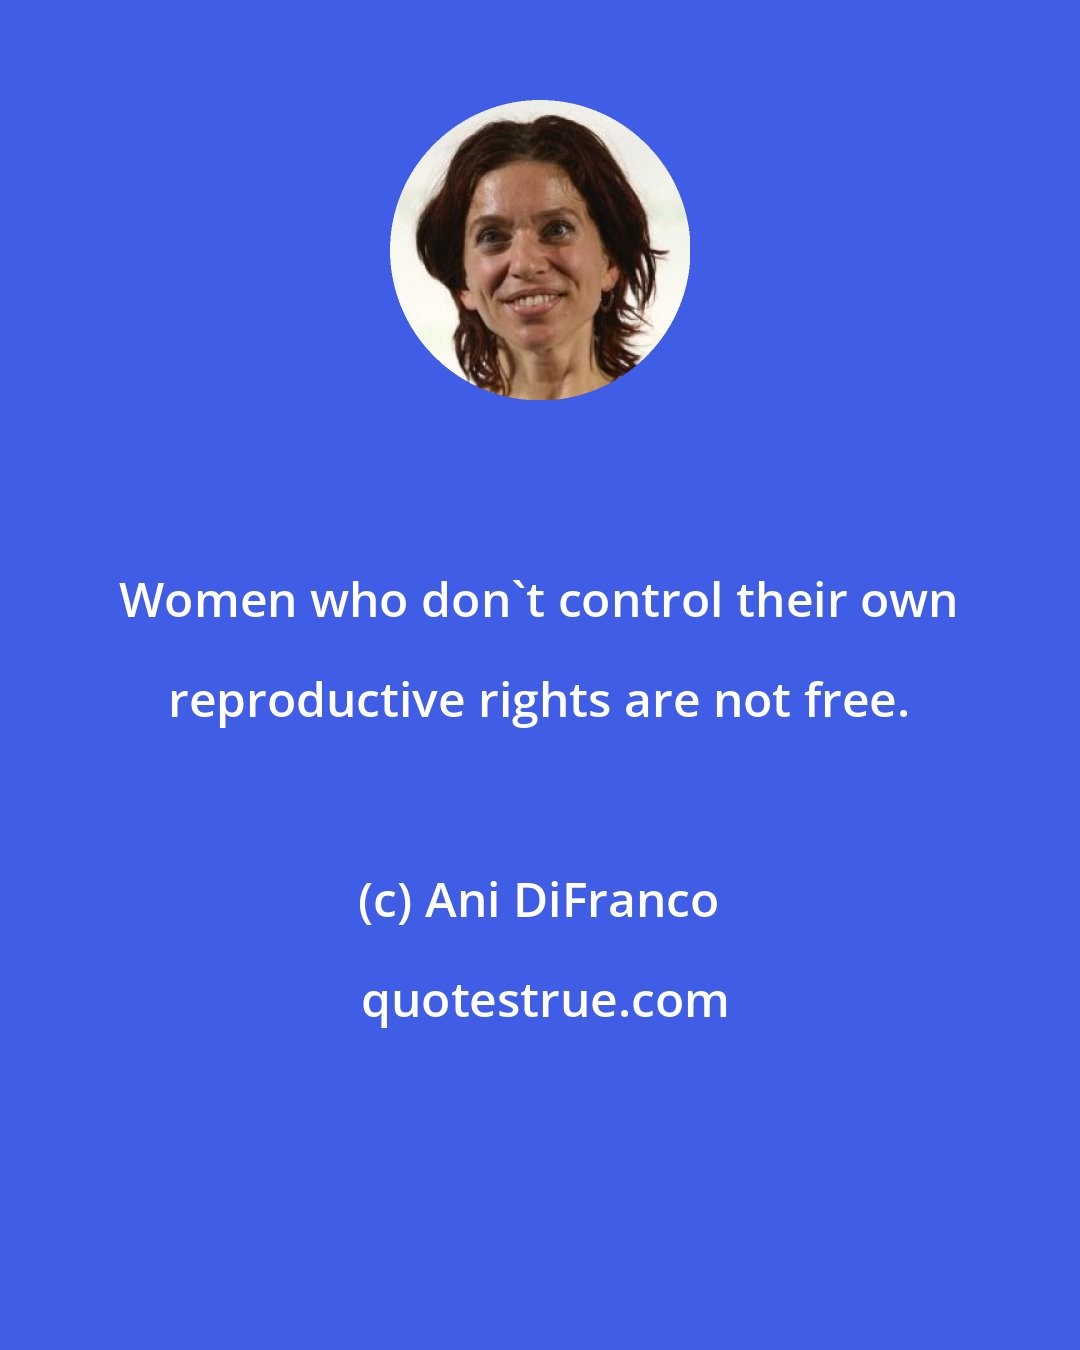 Ani DiFranco: Women who don't control their own reproductive rights are not free.